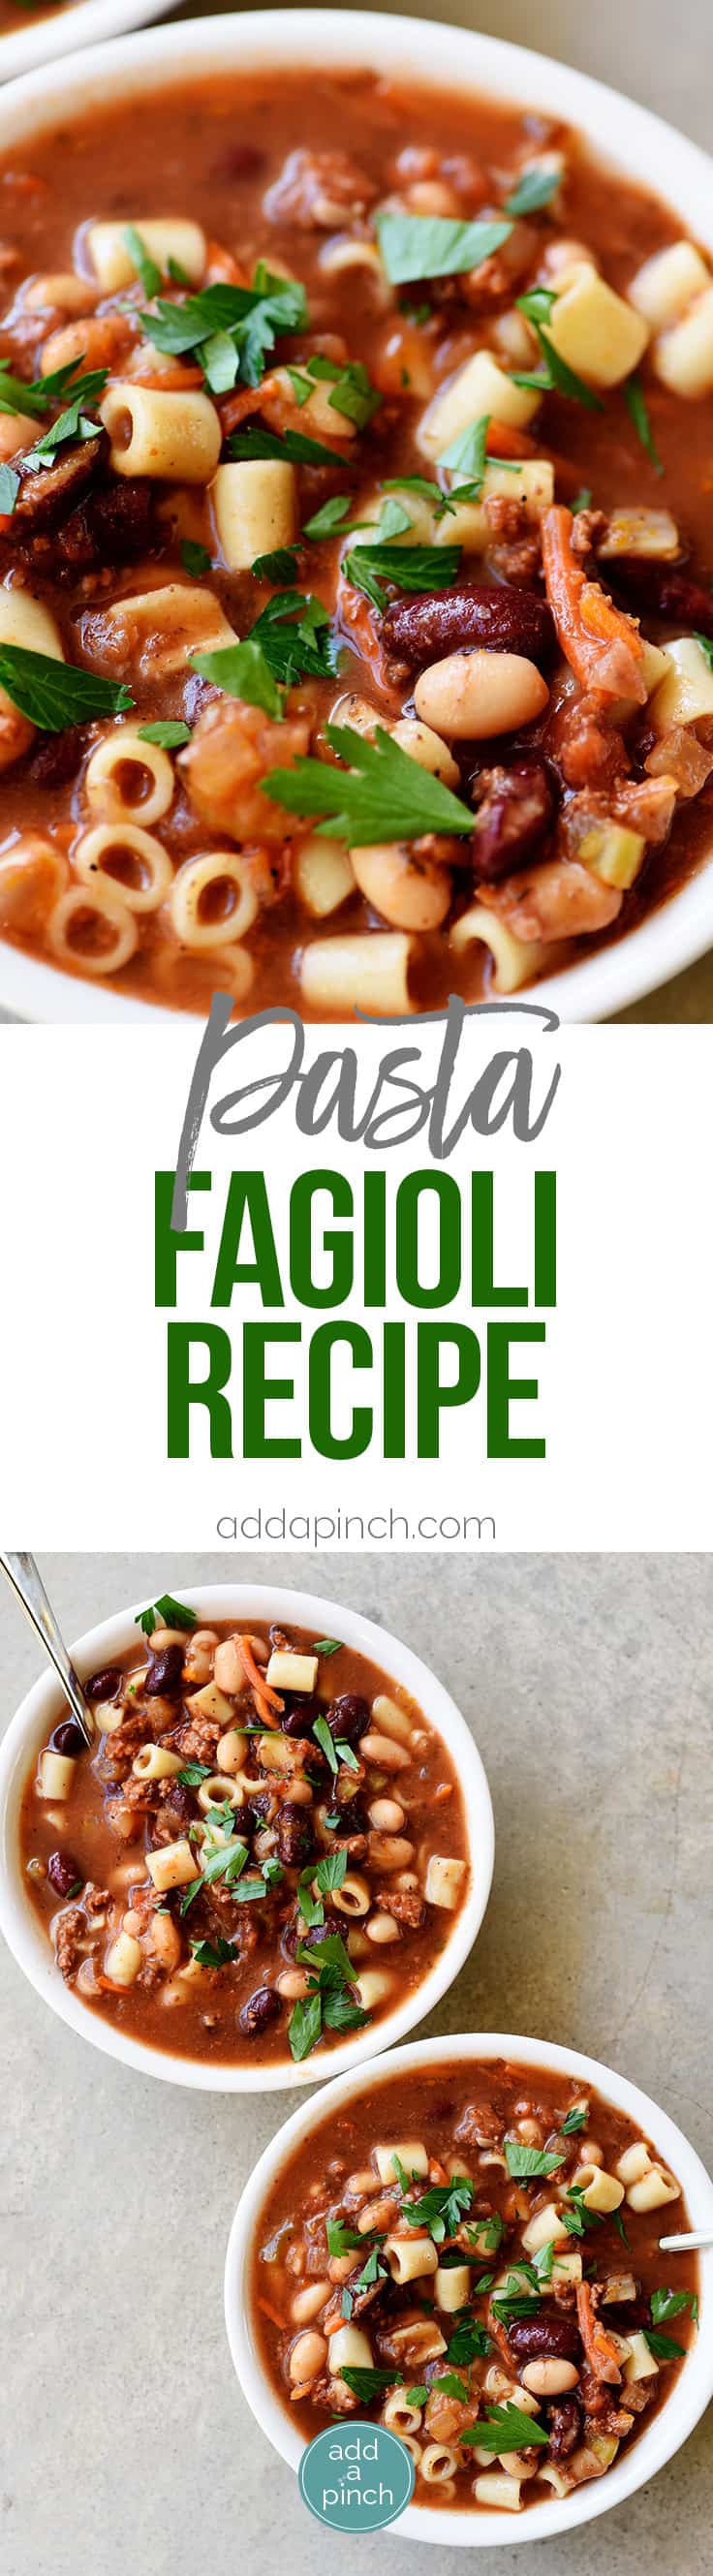 Pasta Fagioli Recipe - If you love the Olive Garden Pasta Fagioli recipe, then I think you'll love this homemade version as much or more! Ready in 30 minutes! // addapinch.com